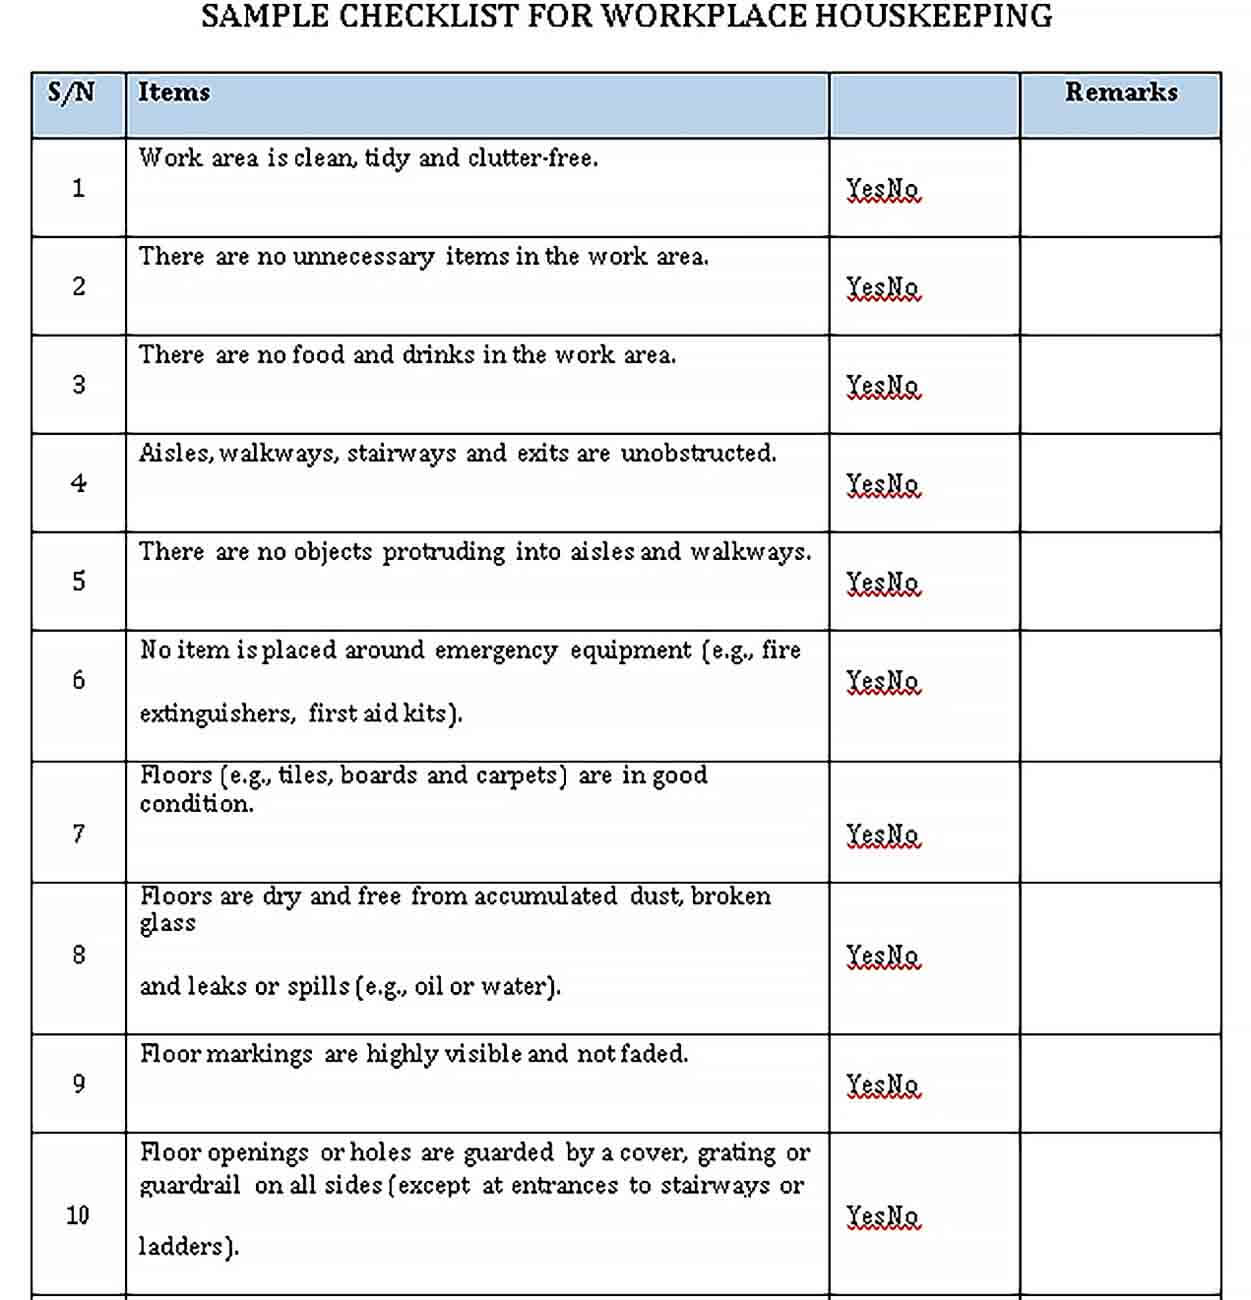 Sample Workplace Housekeeping Checklist Template